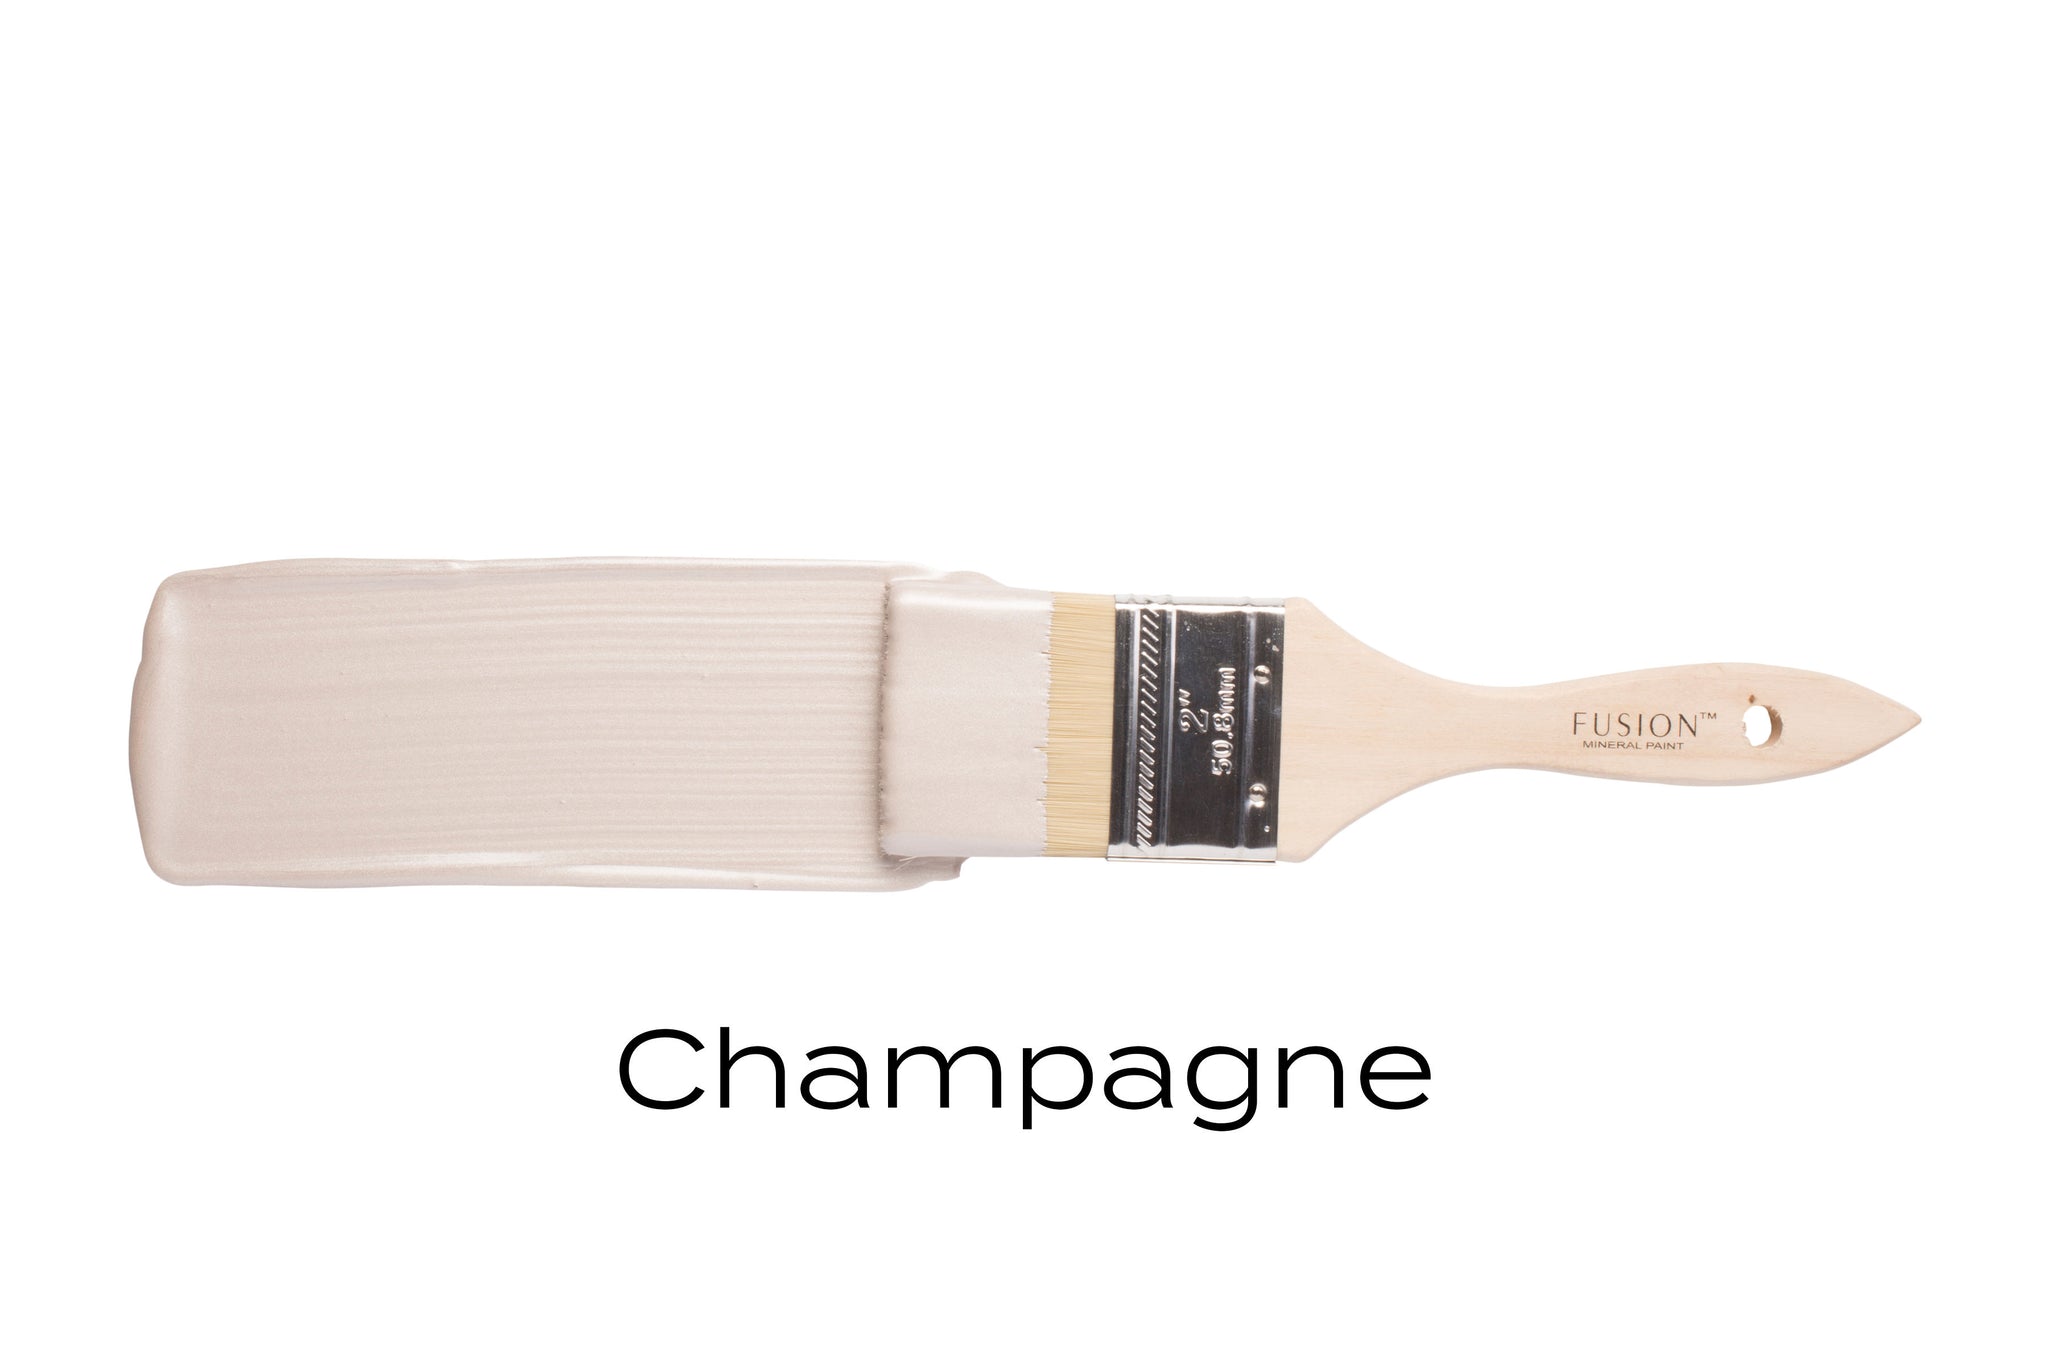 Fusion Mineral Paint Metallic Champagne